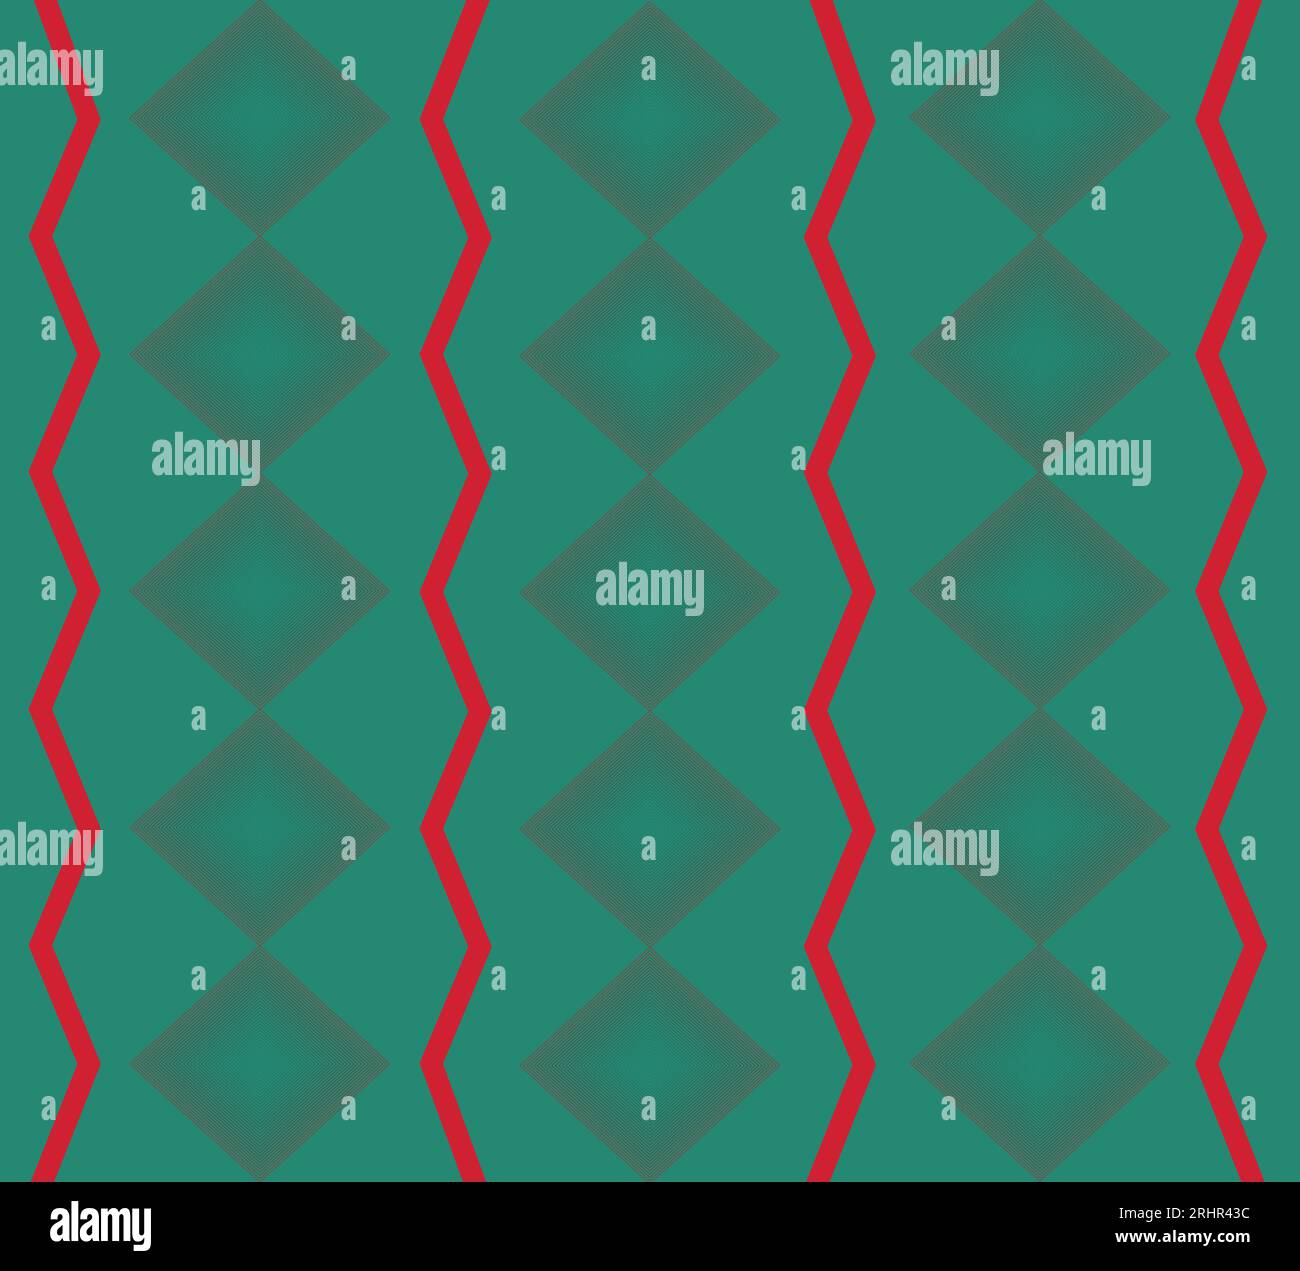 geometric-christmas-wrapping-paper-pattern-stock-vector-image-art-alamy